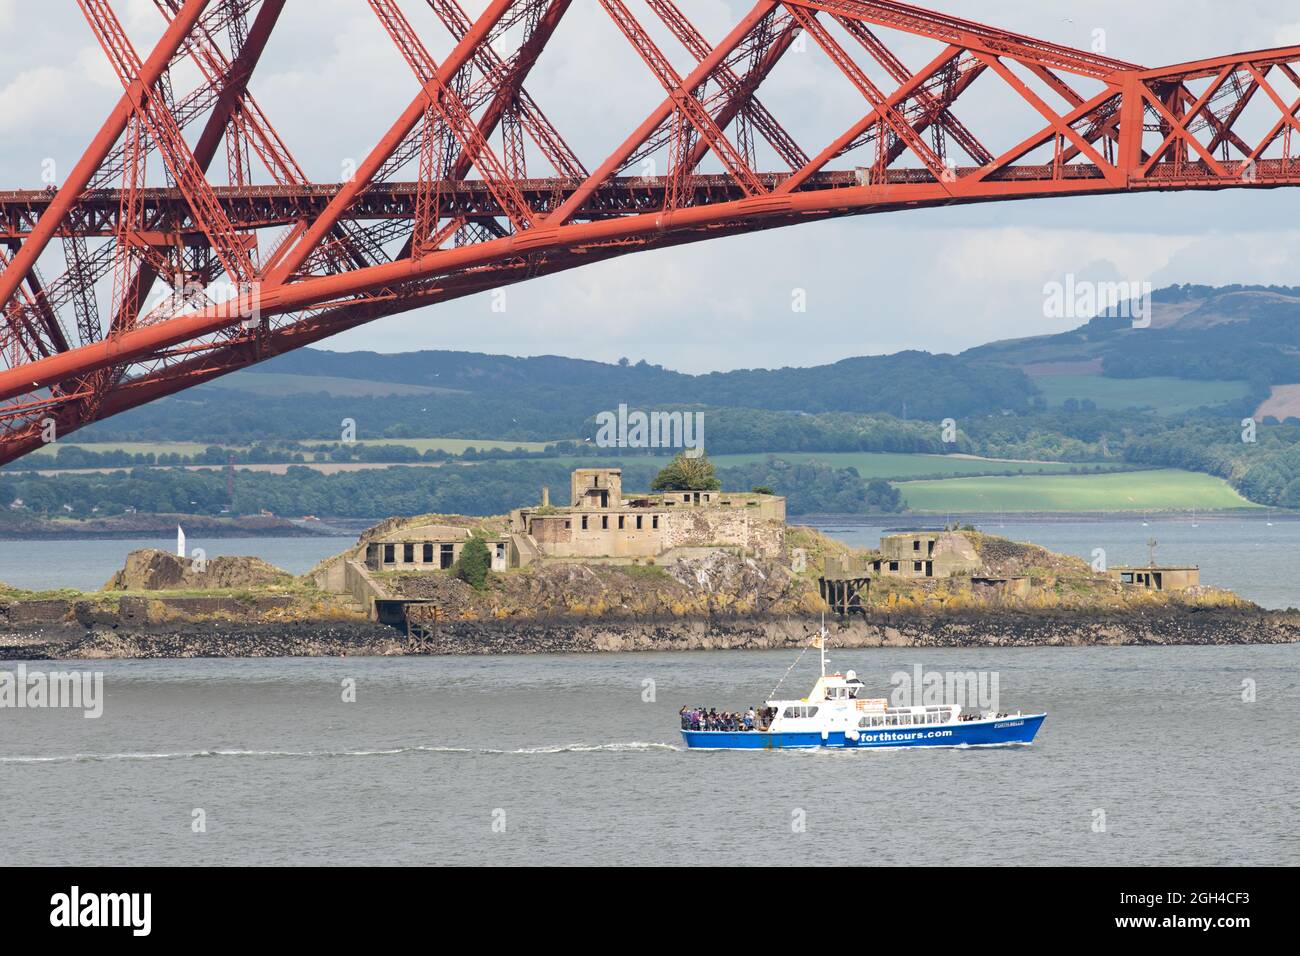 Forth Tours boat - MV Forth Belle - passing by Inchgarvie and the Forth Rail Bridge in the Firth of Forth, Queensferry, Edinburgh, Scotland, UK Stock Photo